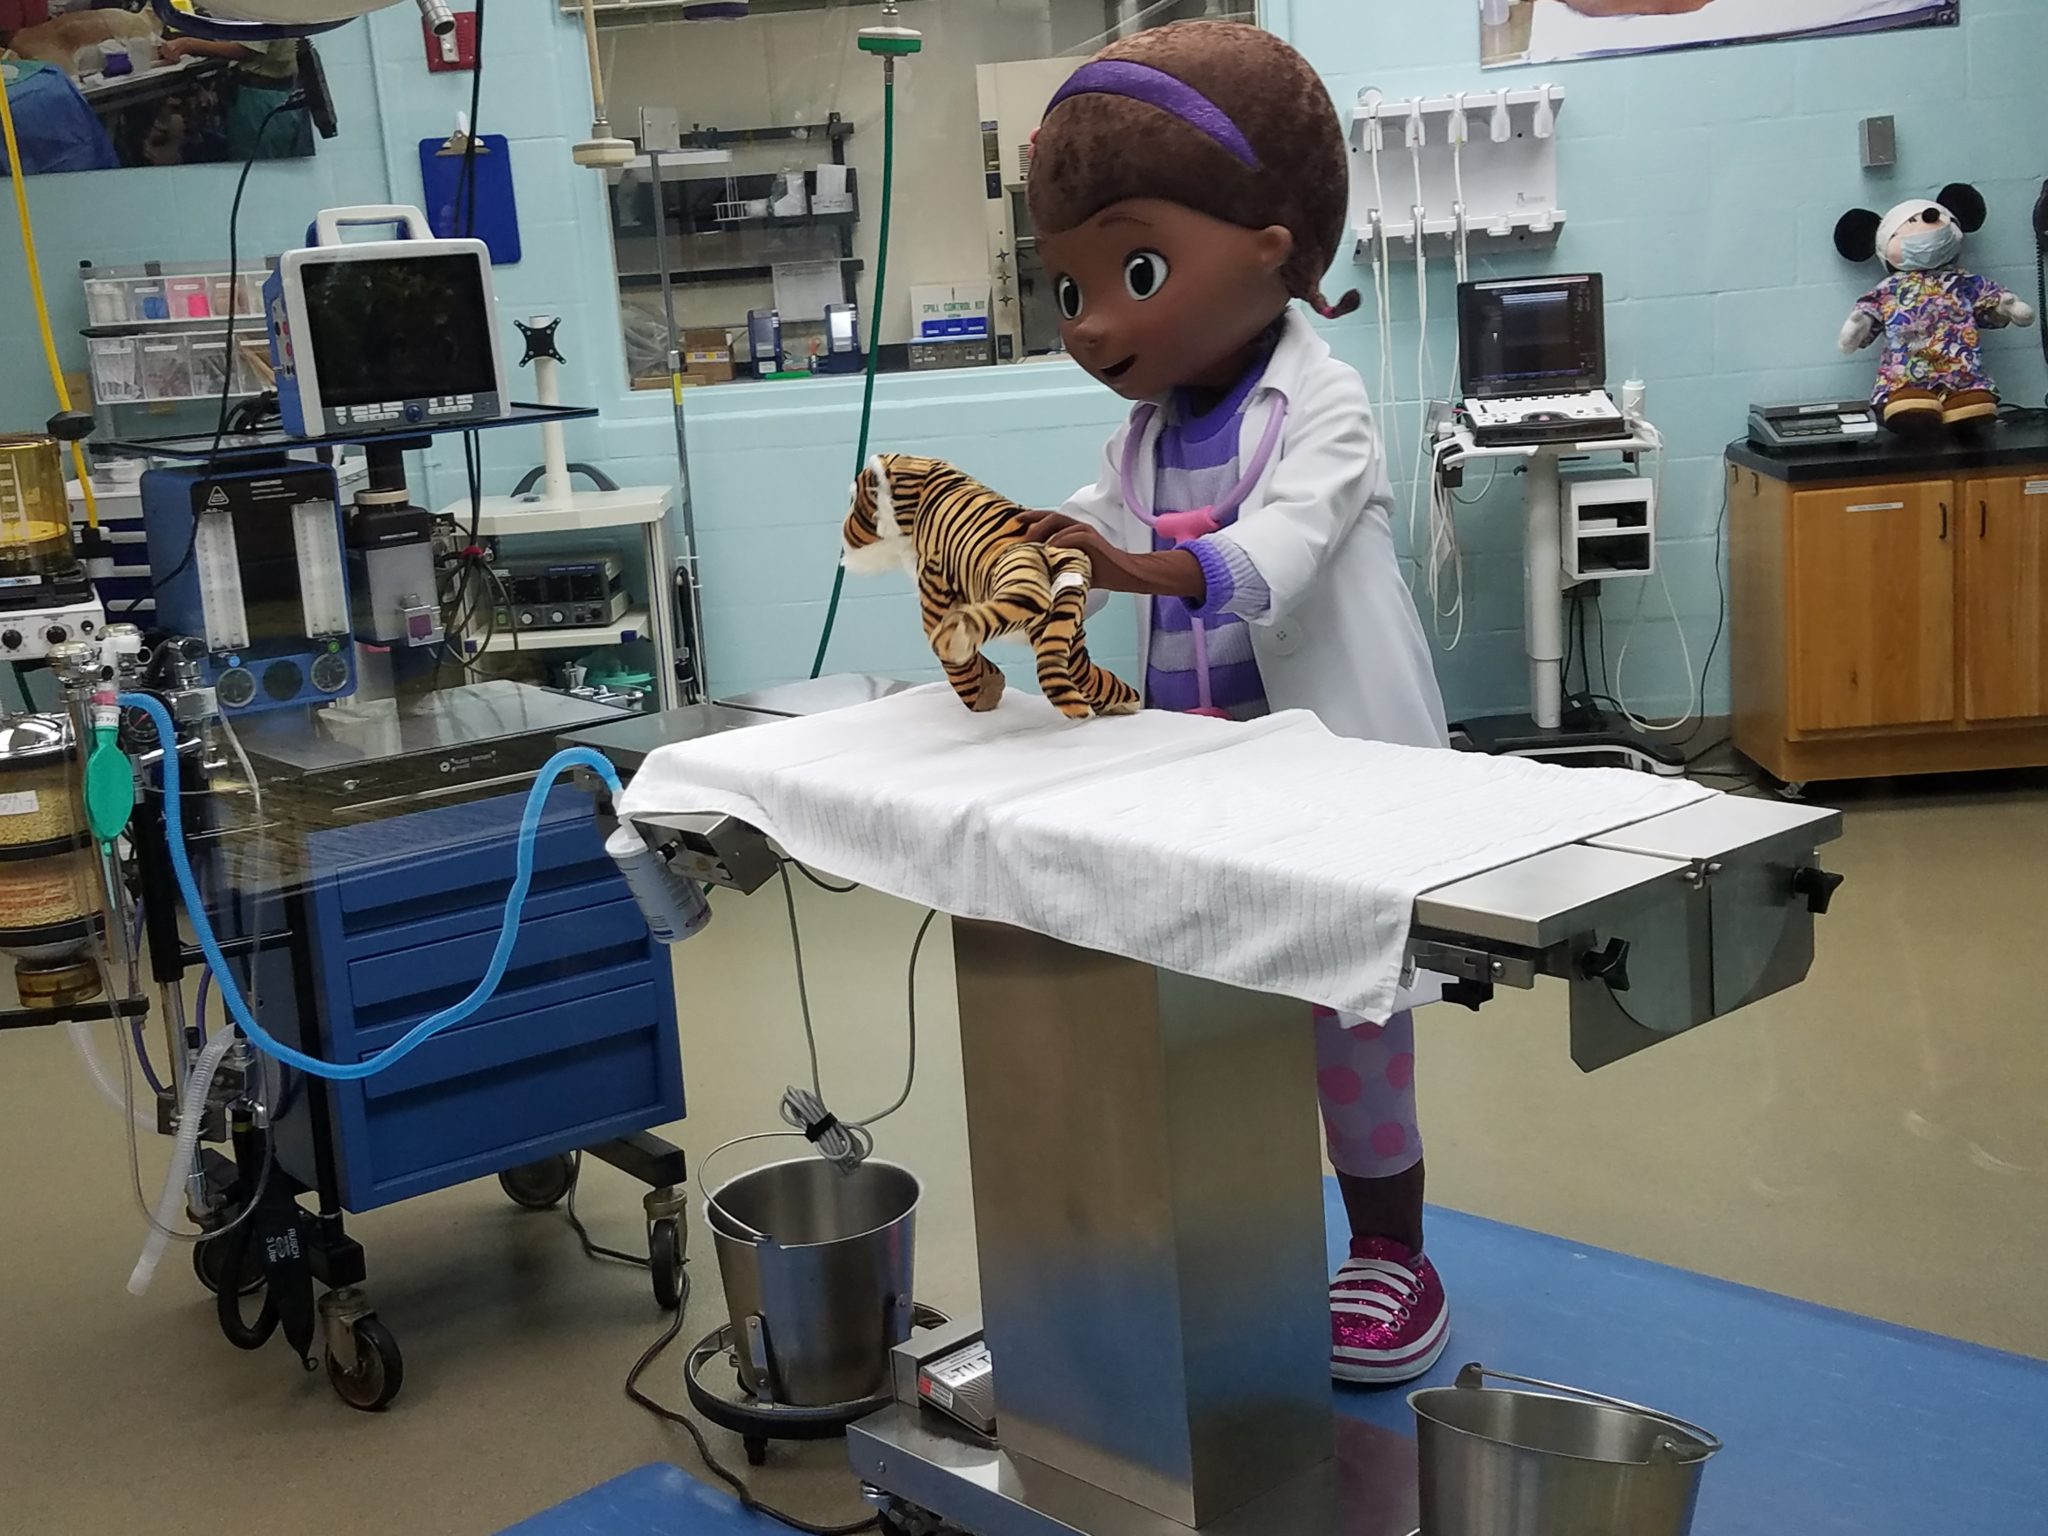 New Doc McStuffins Character Meet in Animal Kingdom’s Conservation Station